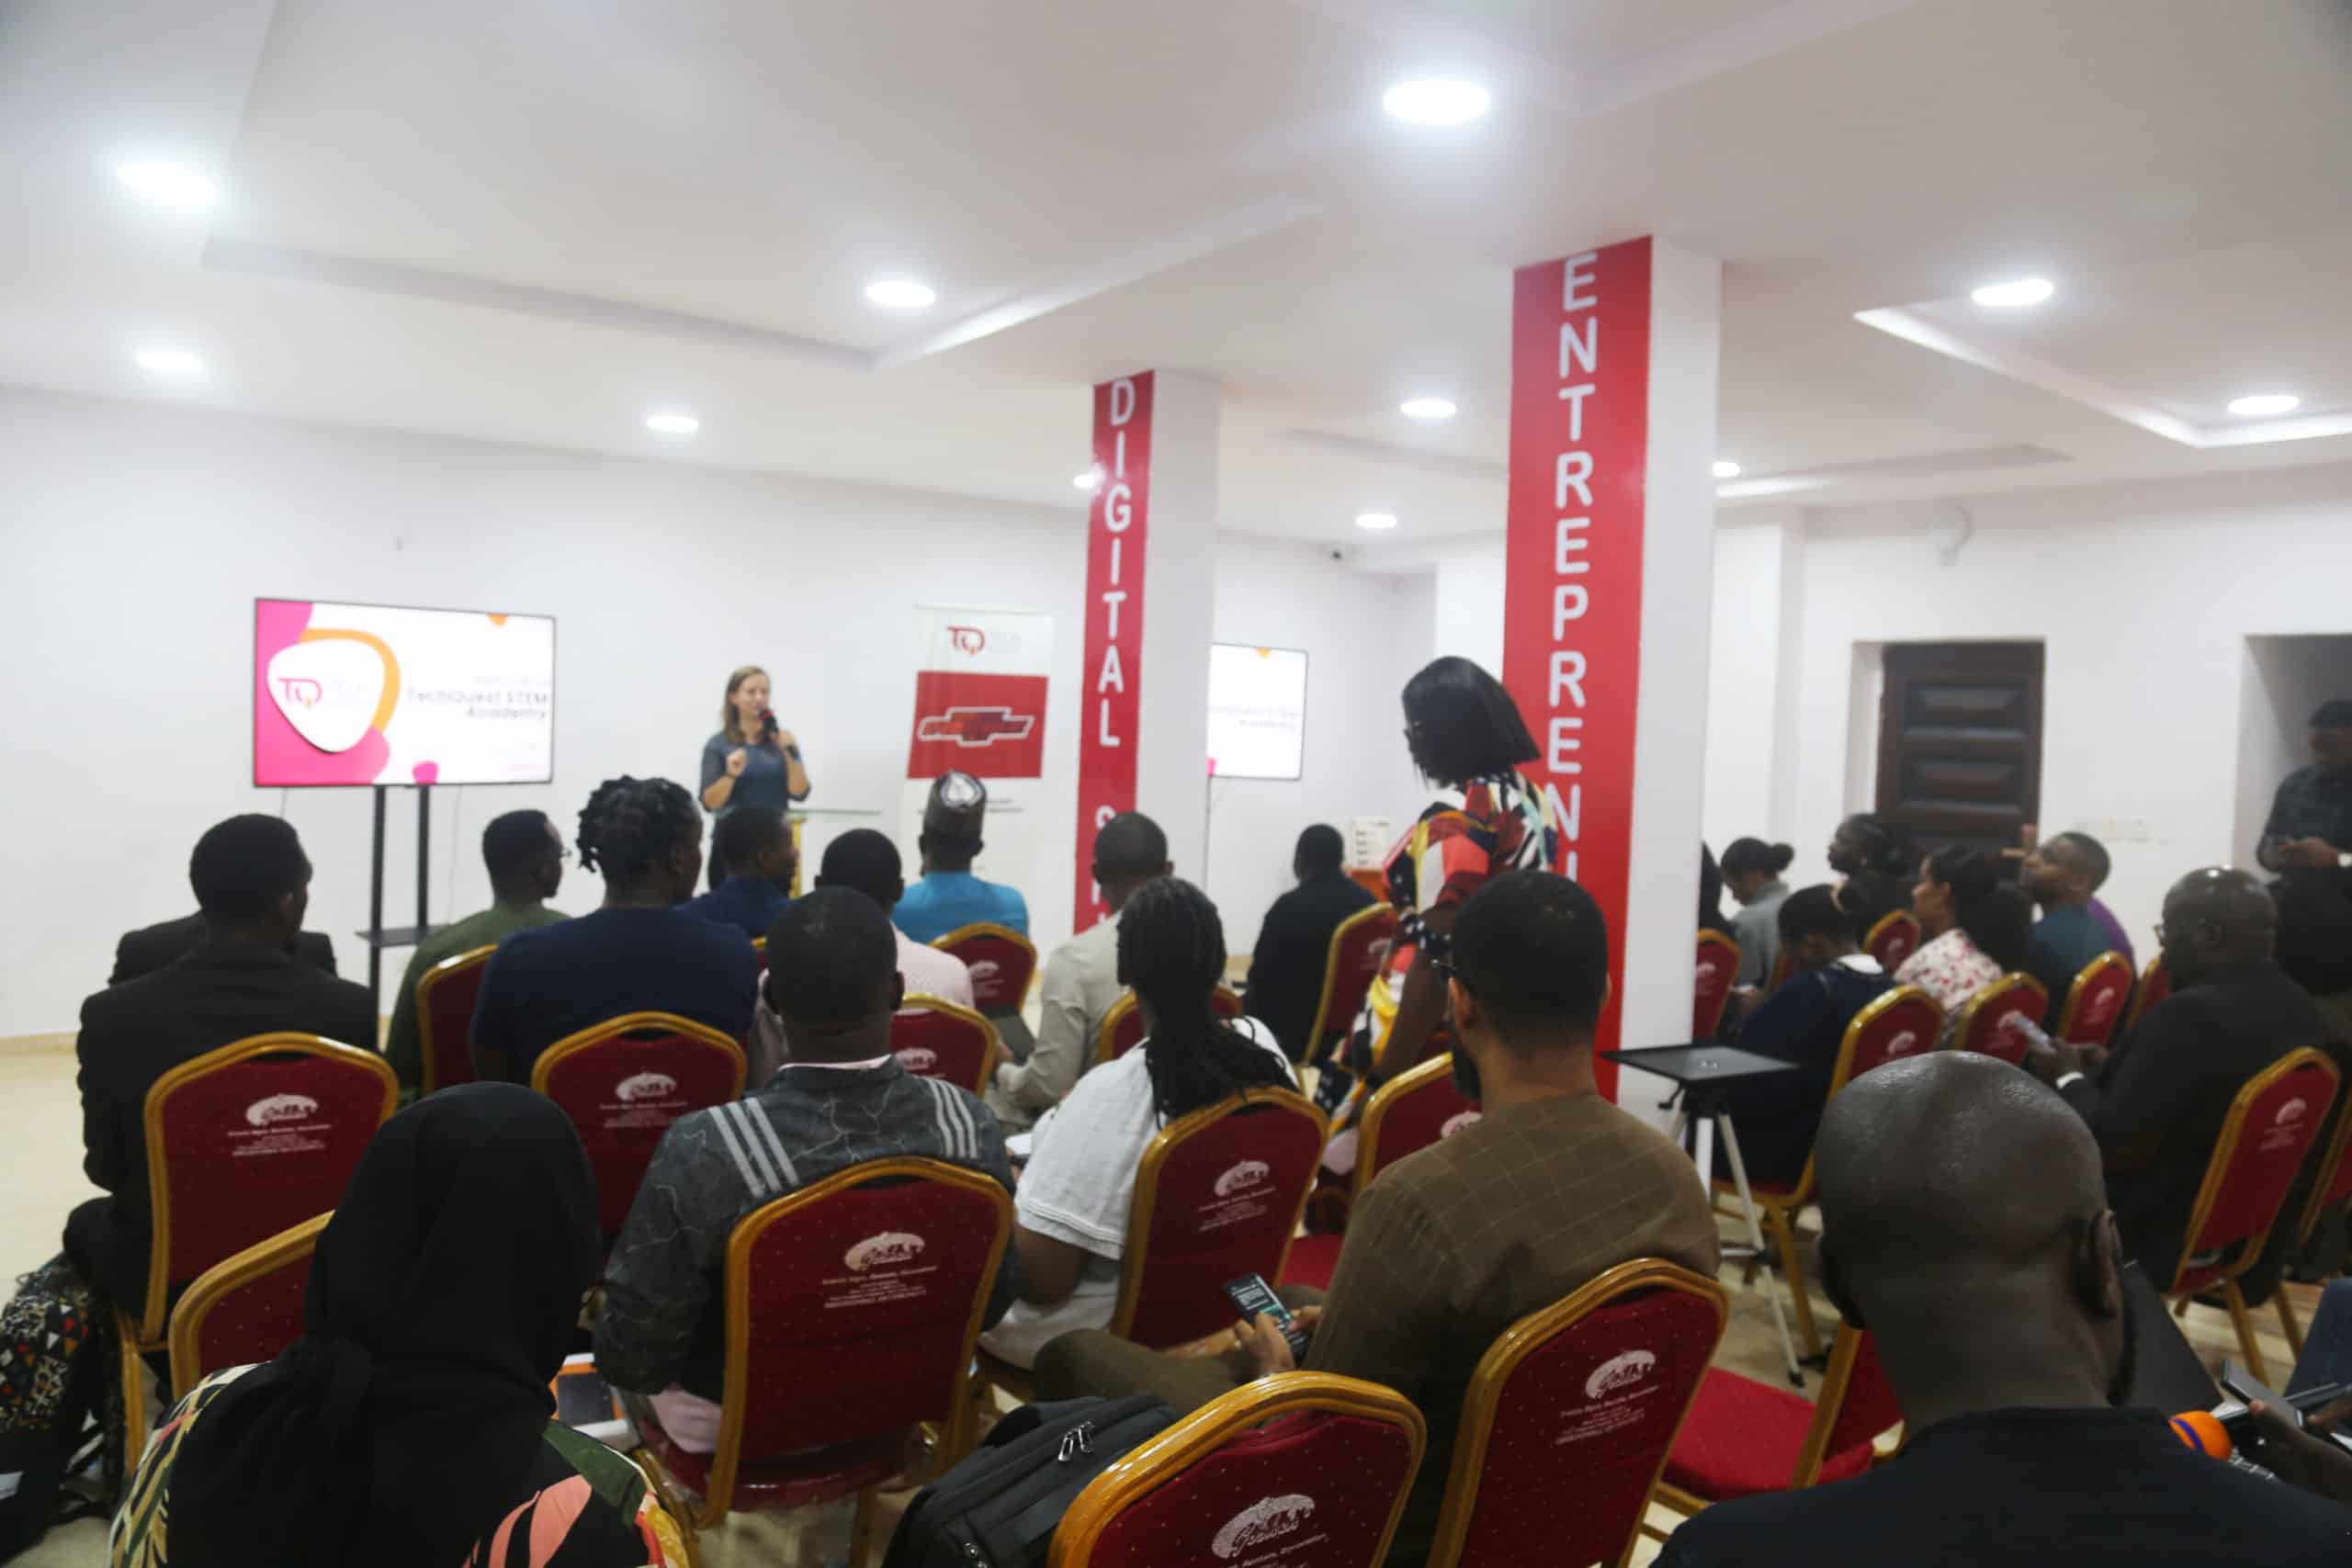 Digital And Innovation Fellows From The African Union Explore Nigeria’s Startup Ecosystem